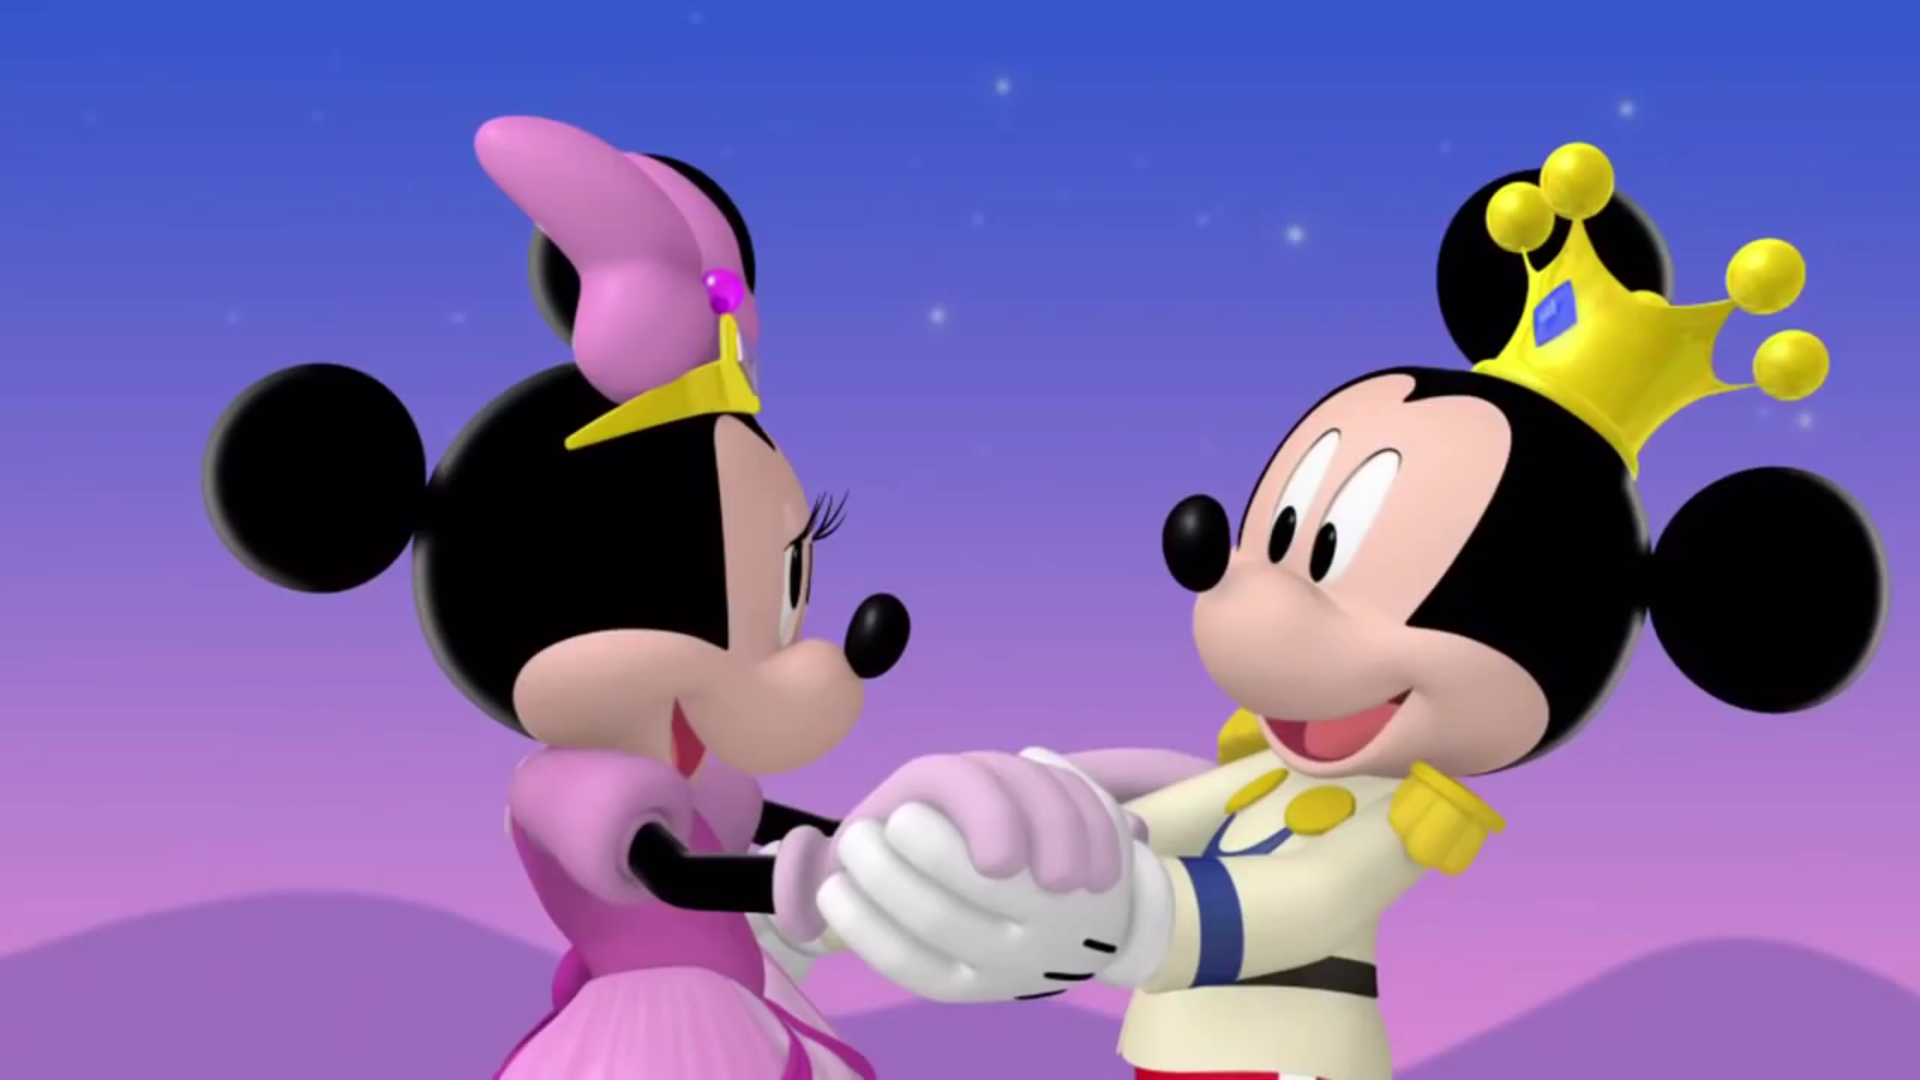 Prince Mickey And Princess Minnie Rella   Dance.png - Animated Dancing, Transparent background PNG HD thumbnail